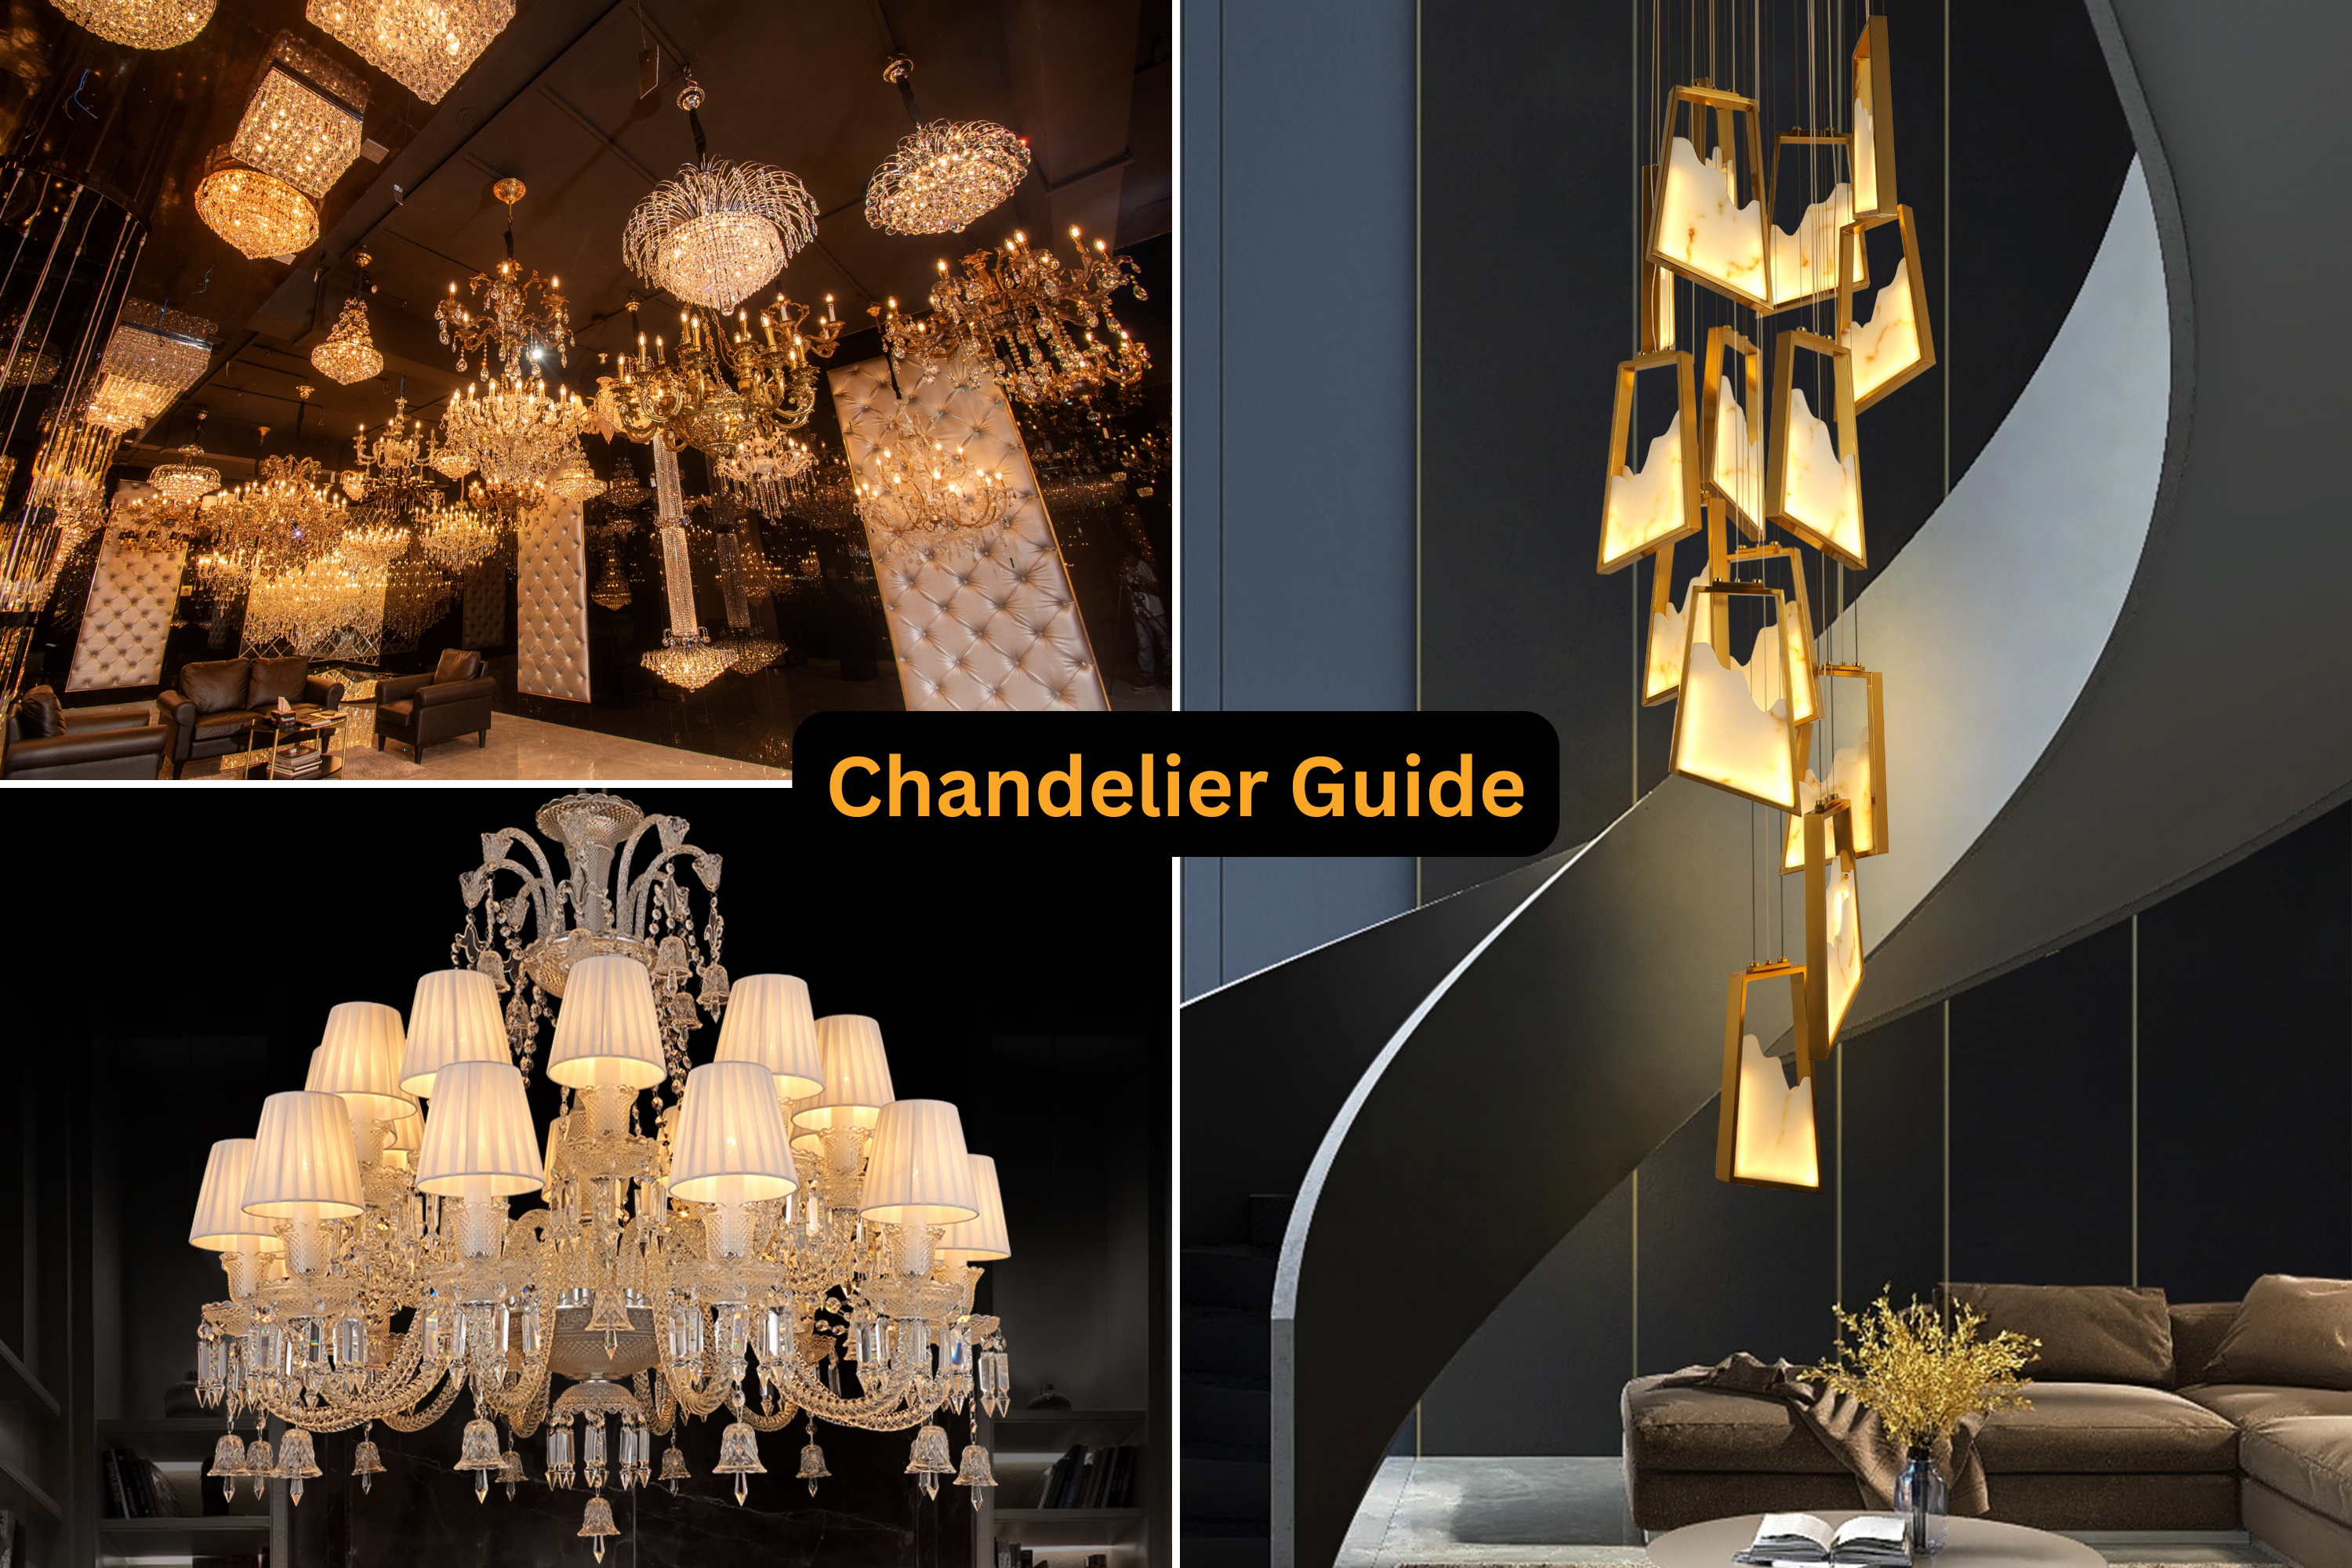 Chandelier Ideas: A Guide to Choosing the Right Chandeliers